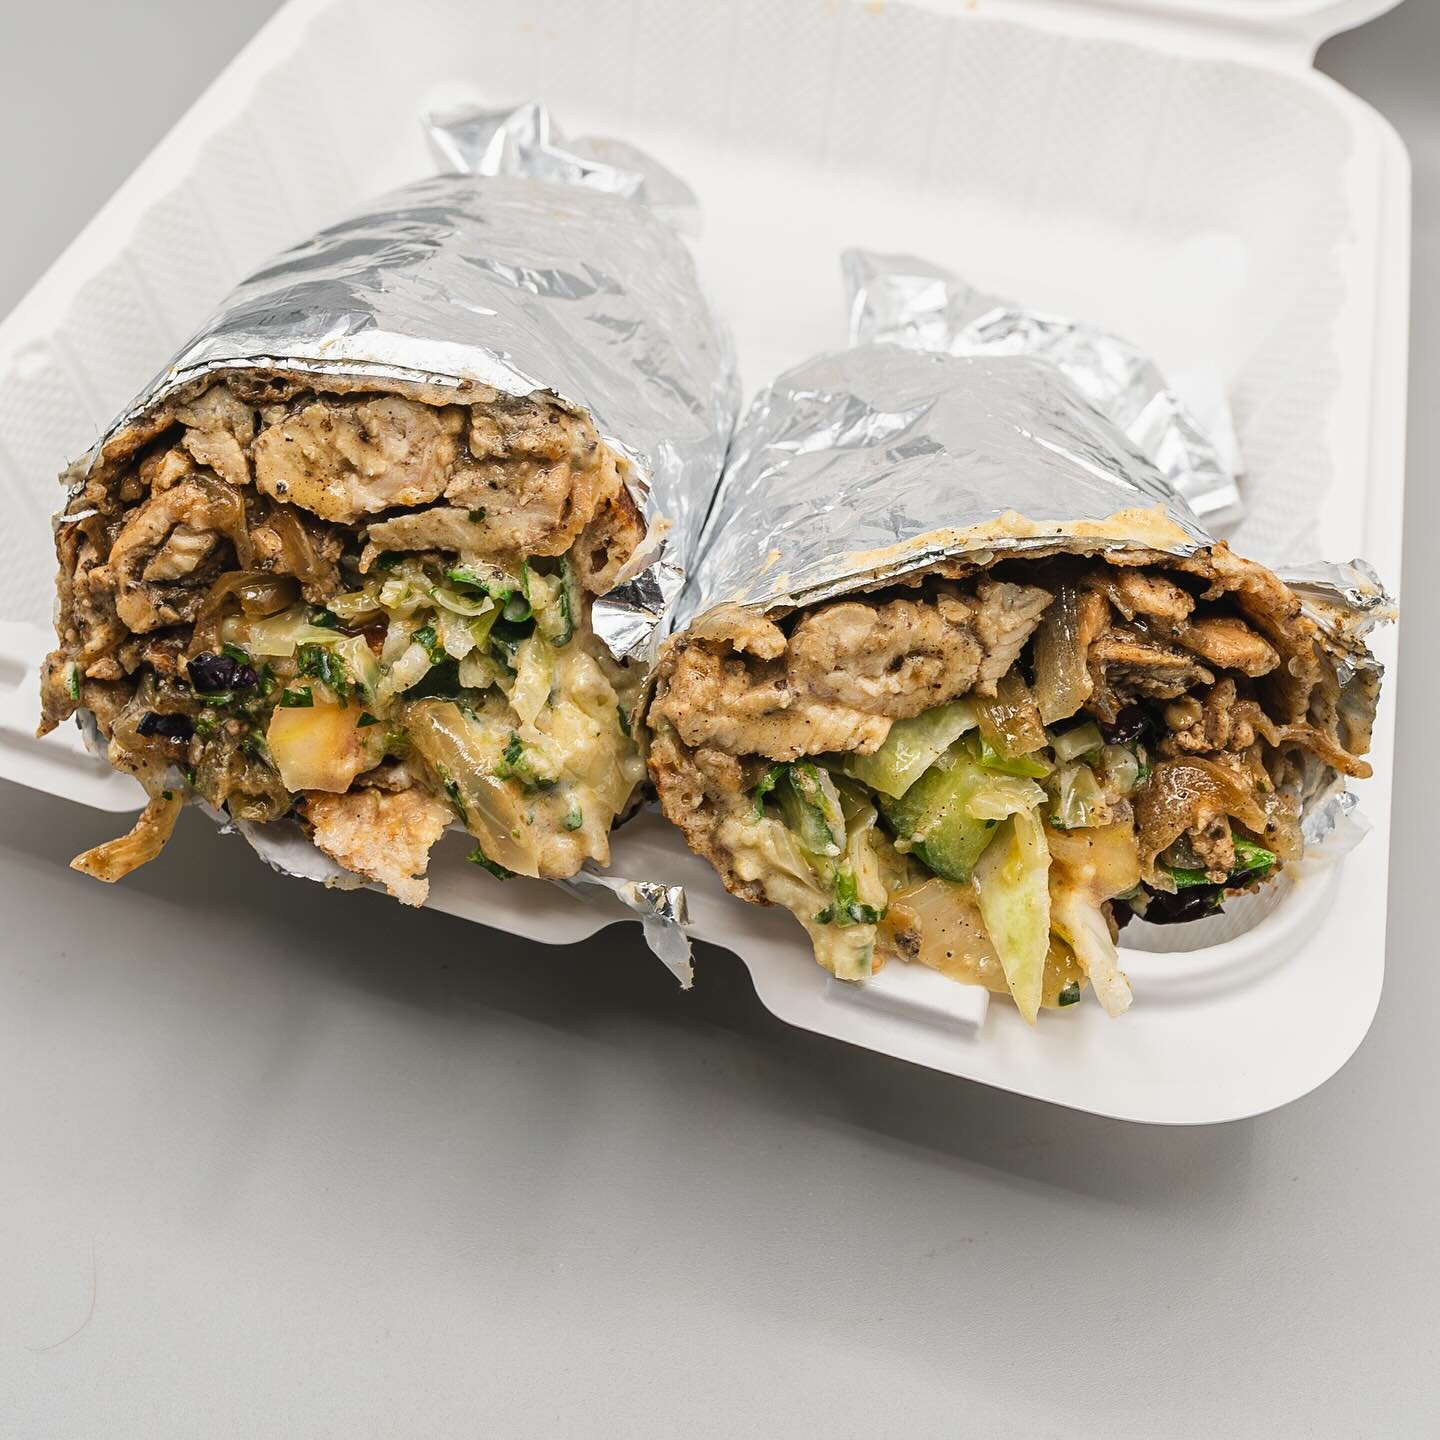 Chicken Shawarma Wrap ~ Our best seller! Halal, hormone-free chicken breast, thinly sliced, grilled with white onions and Turkish spices. Have it as a wrap as a delicious &ldquo;on-the-go&rdquo; meal!